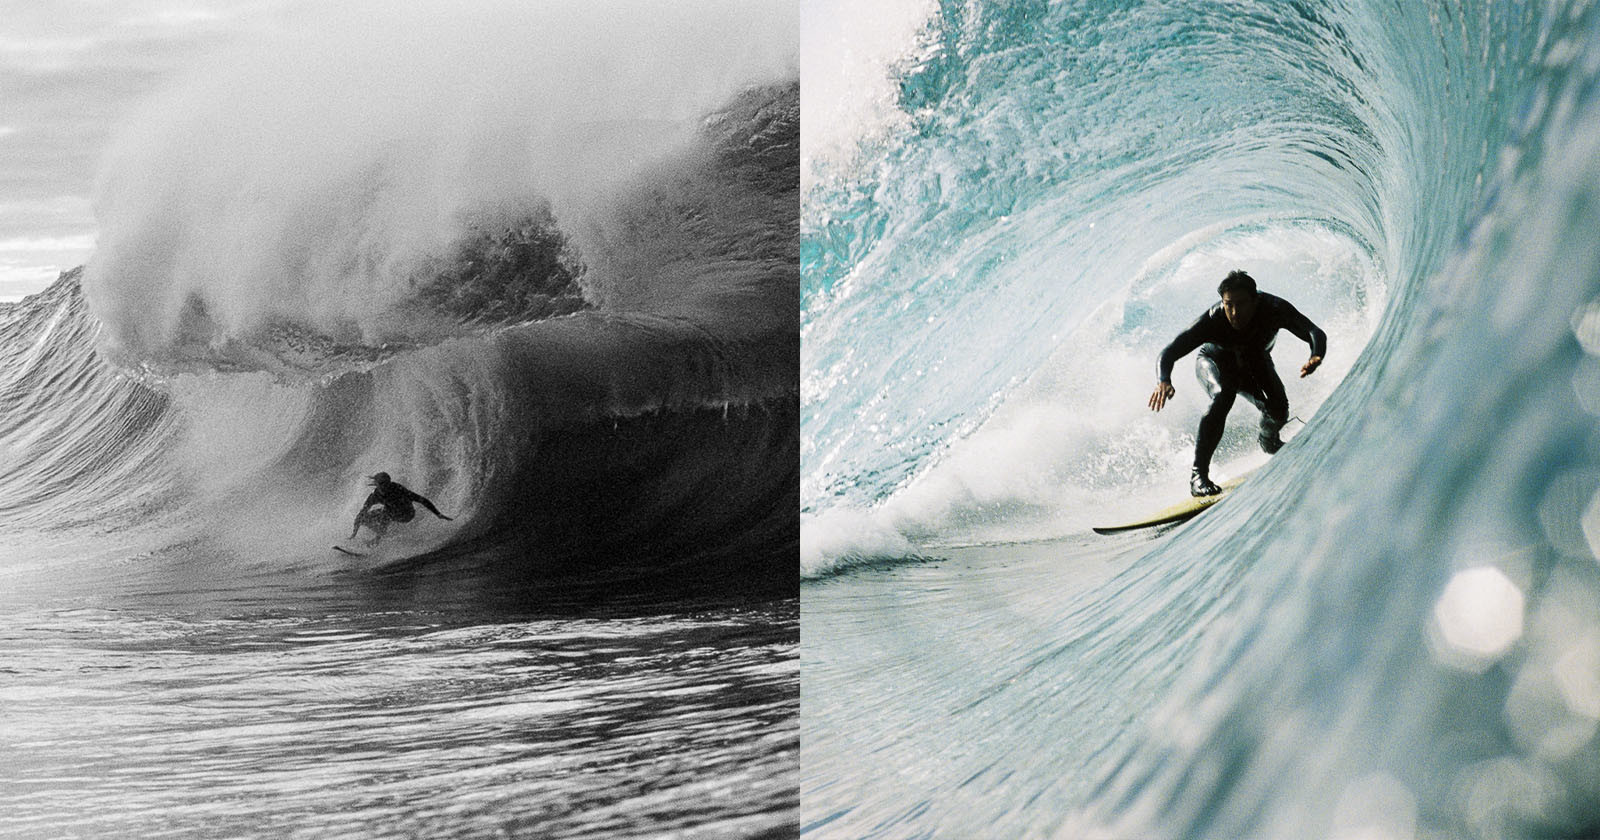  why surf photographer ditched digital went 